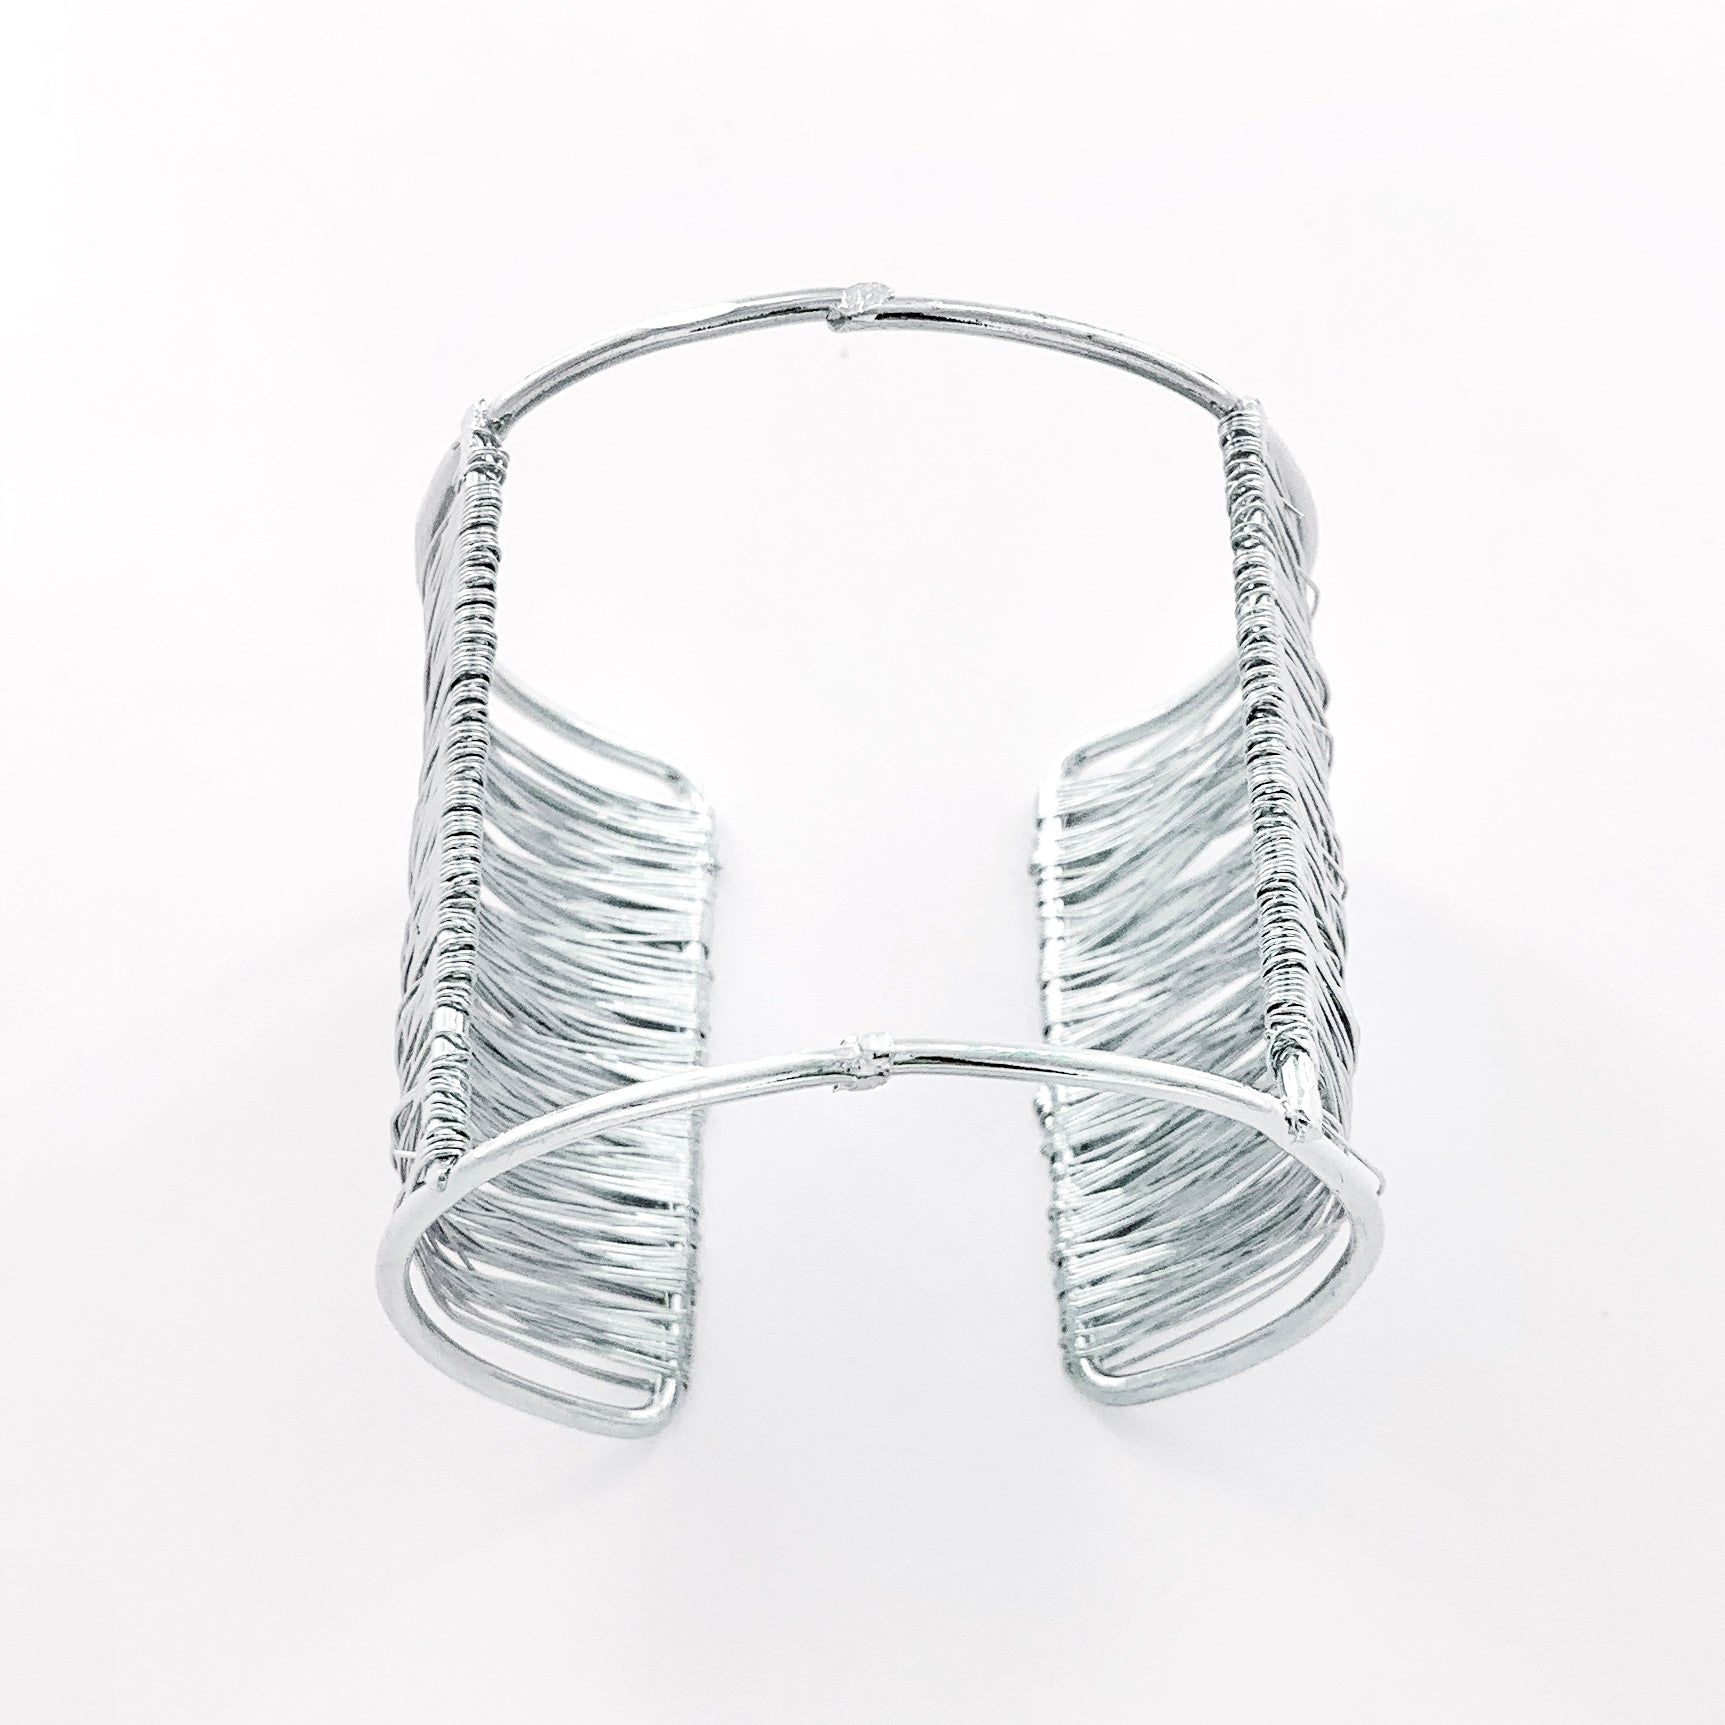 Silver cuff with twisted mesh design